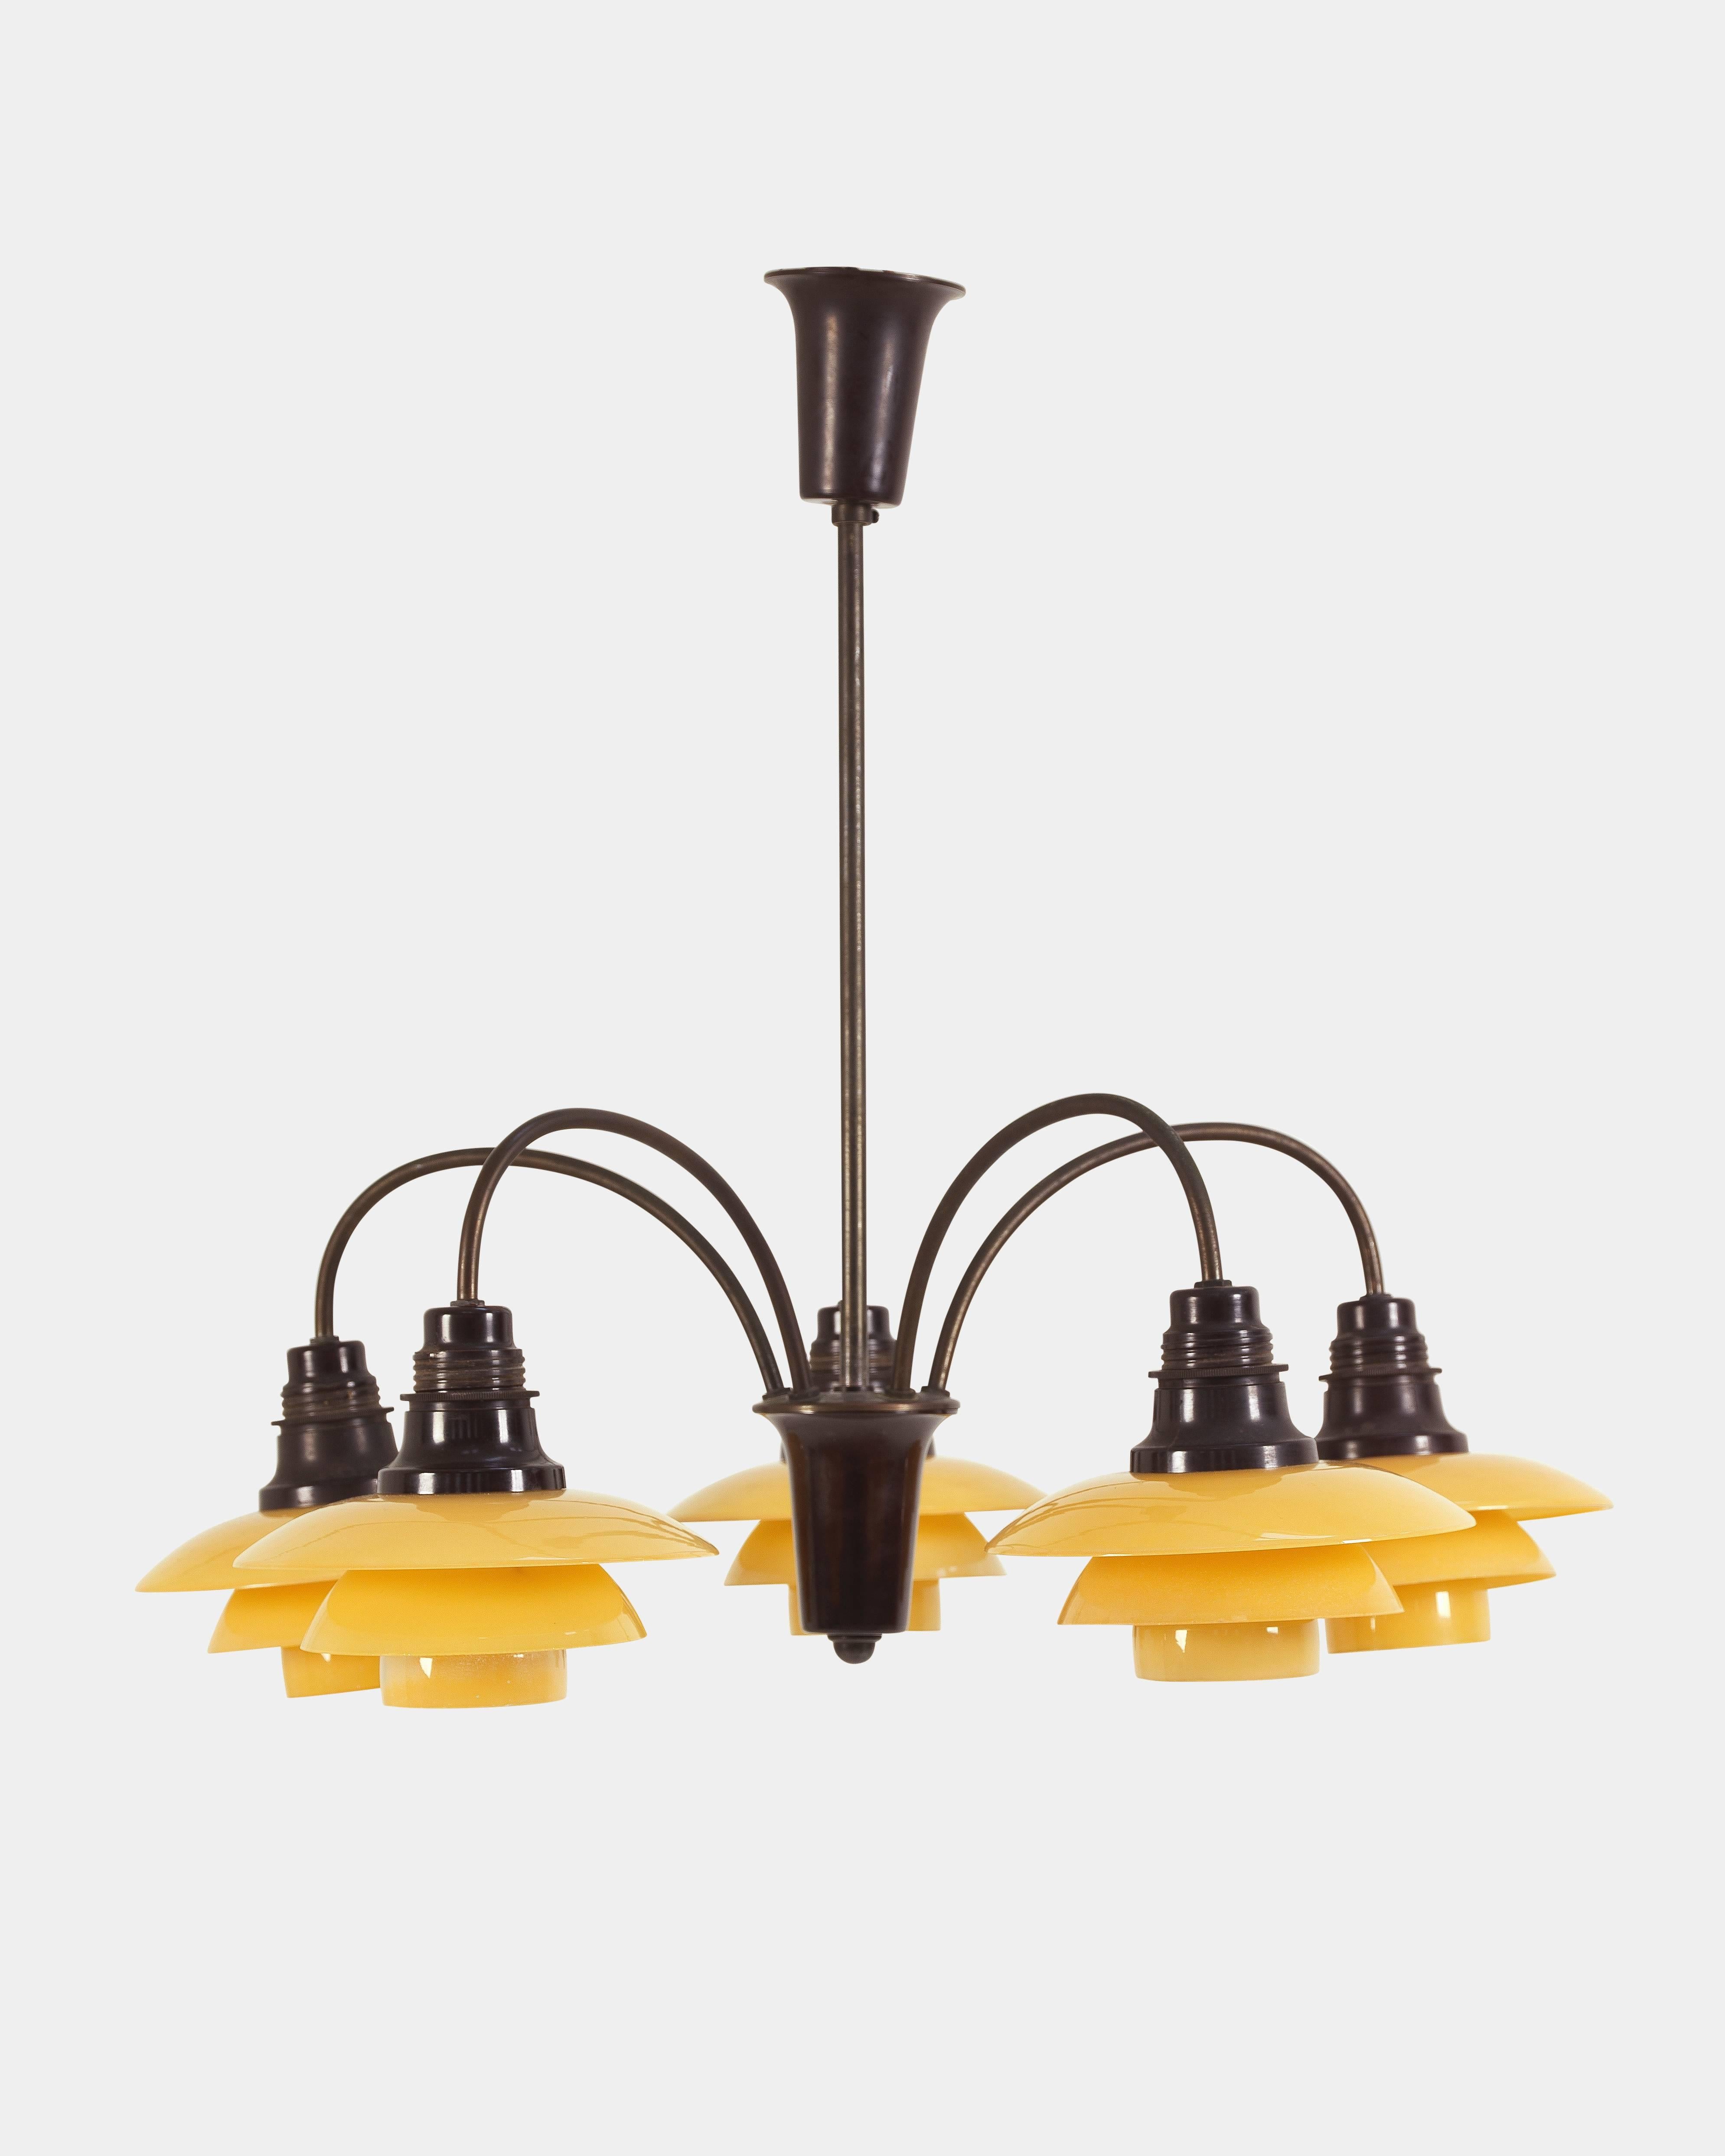 Poul Henningsen (1894-1967):
Cascade chandelier/bombardementskrone.
Five-armed, Cascade Chandelier with browned brass frame, bakelite sockets and complete 2/2 matt yellow glass shade set.
Manufactured by Louis Poulsen in the